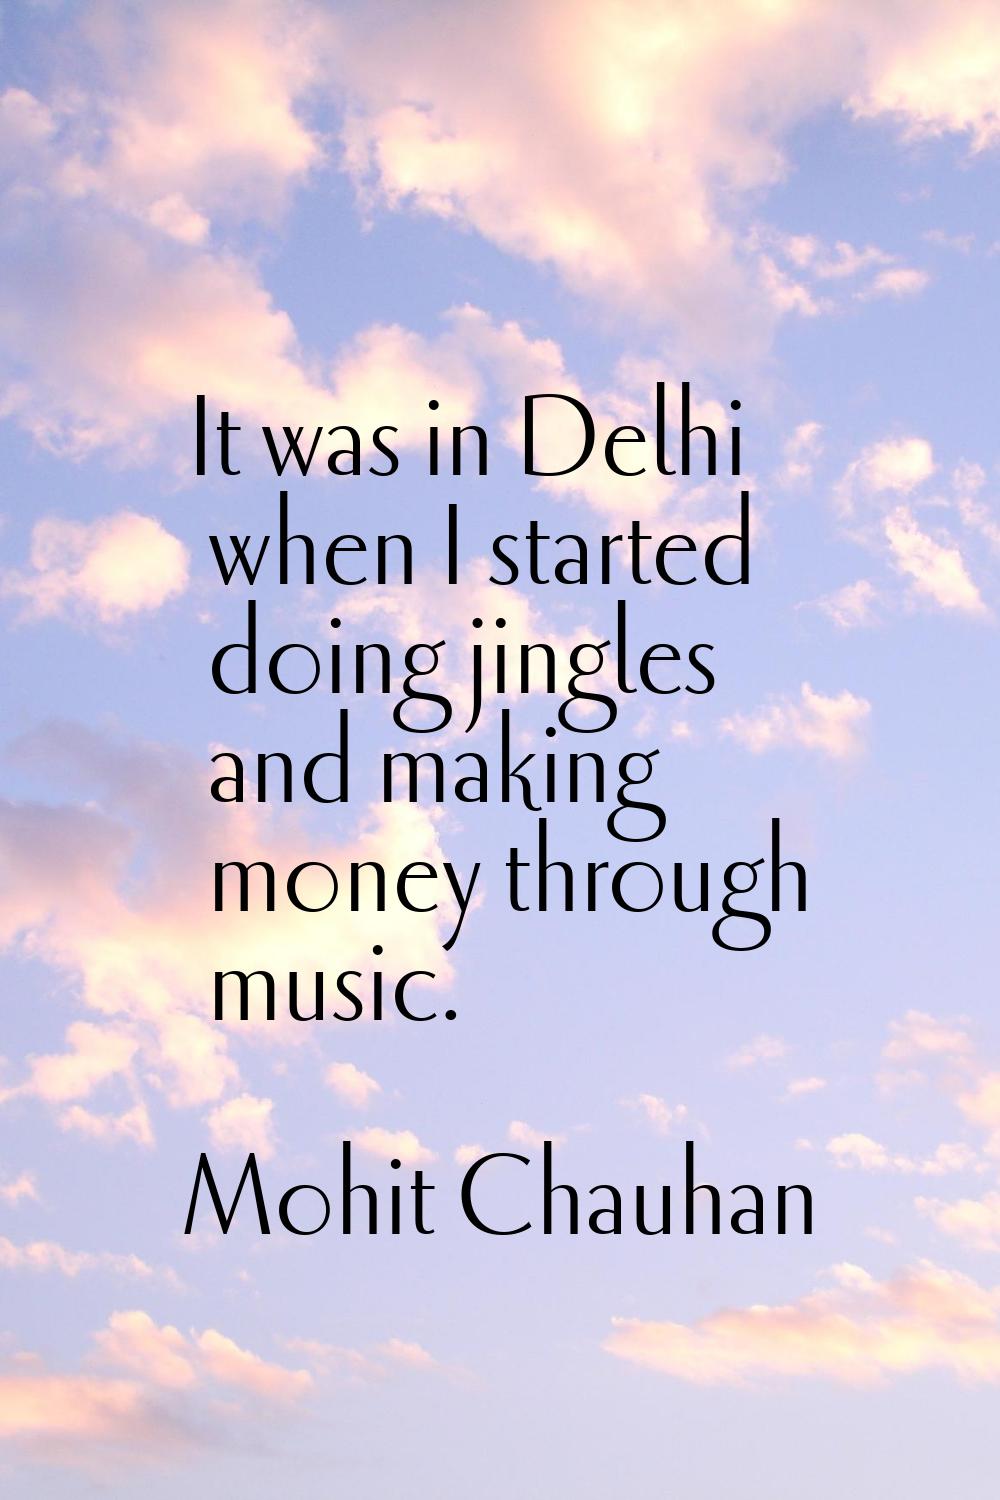 It was in Delhi when I started doing jingles and making money through music.